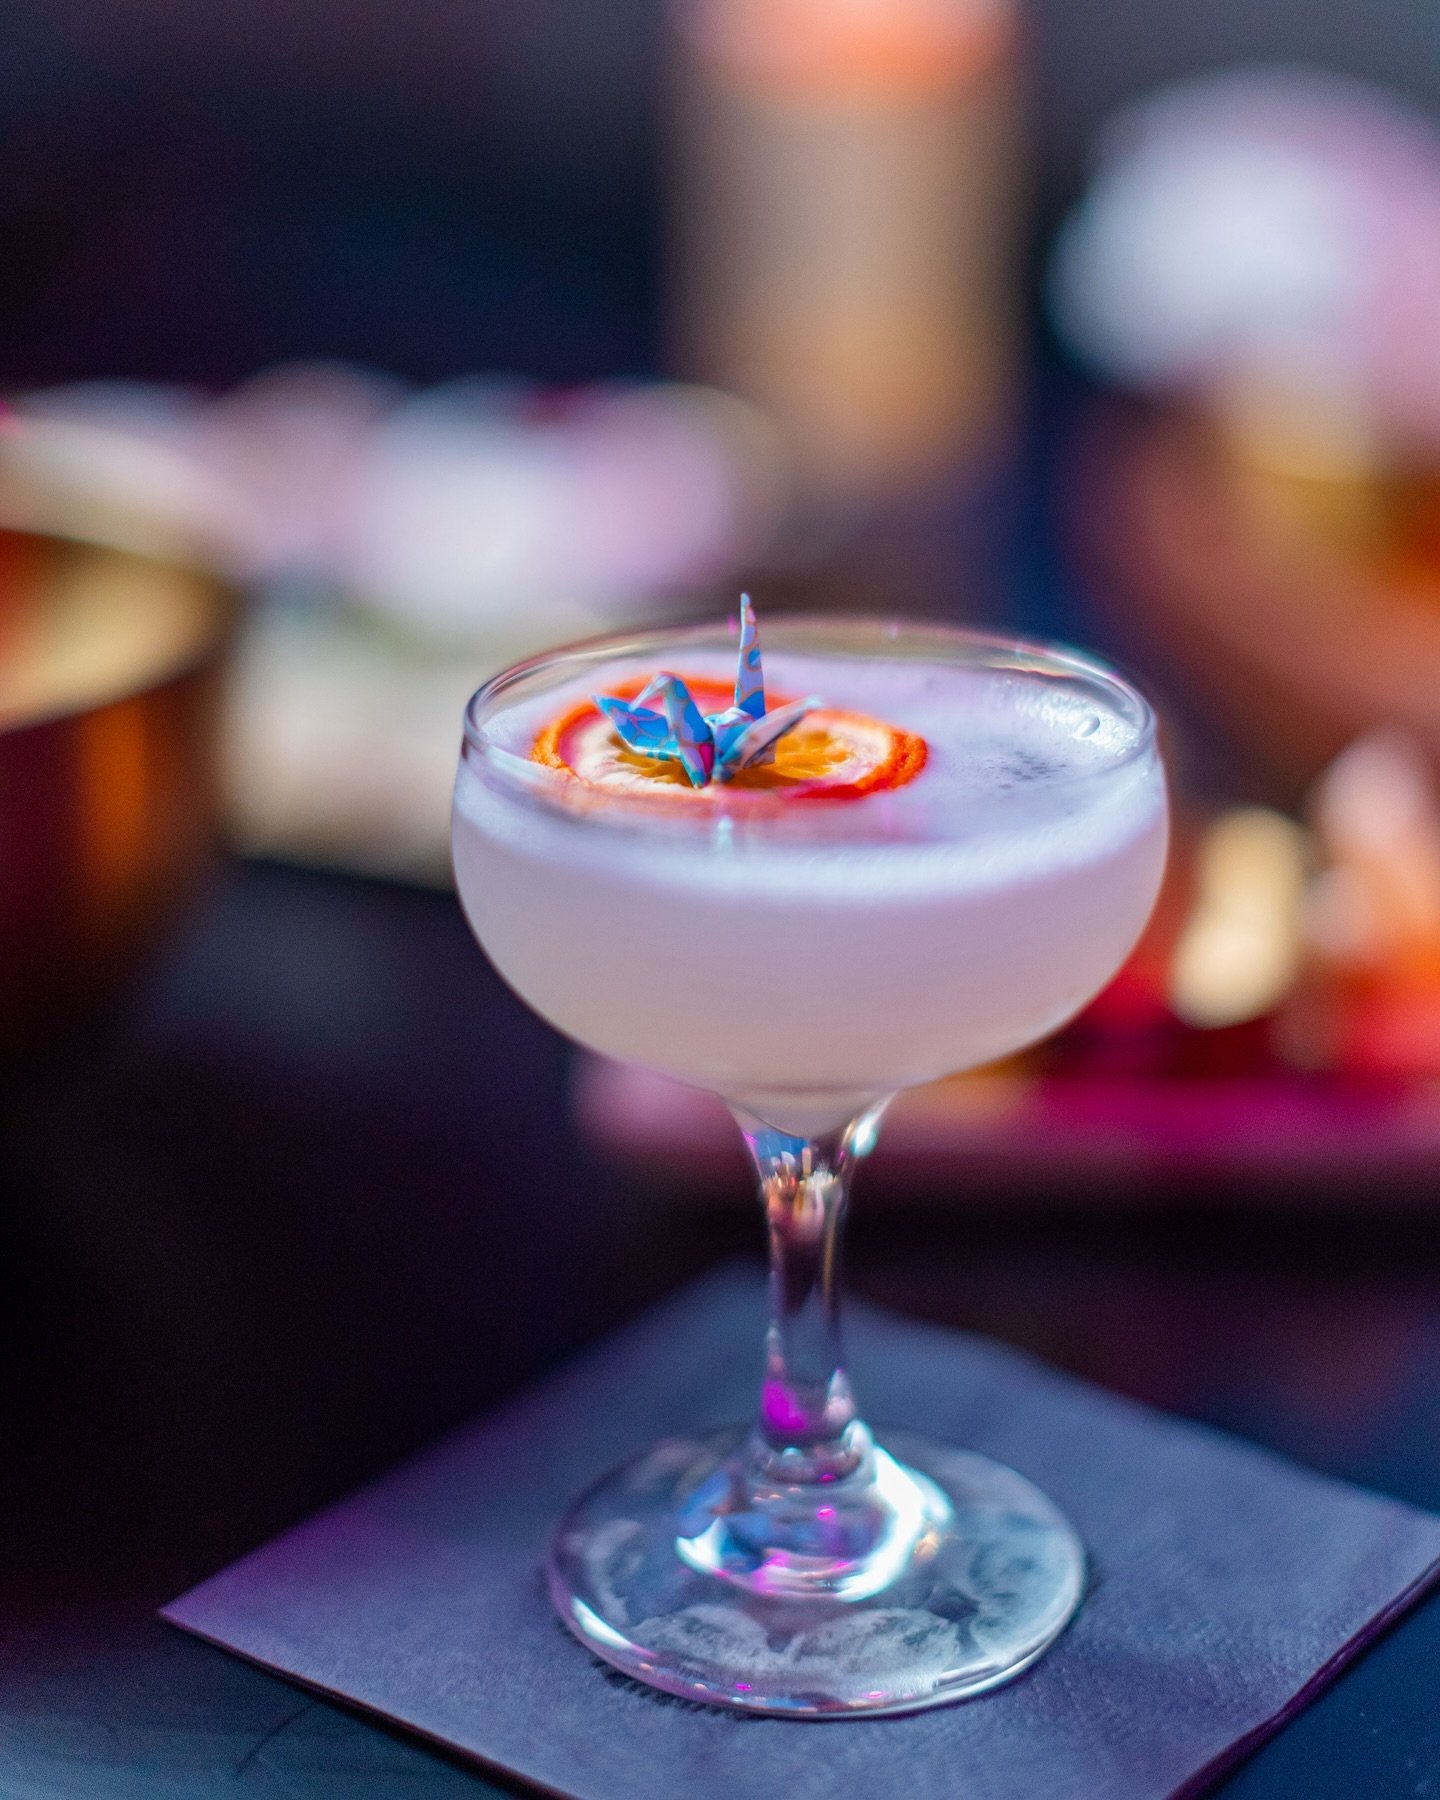 Shake off those Monday feels with a craft cocktail at Bar Diver. It&rsquo;s all about unwinding and enjoying the start of the week. Let&rsquo;s raise a glass to that! 🍸 #BarDiverATL #ATLEats